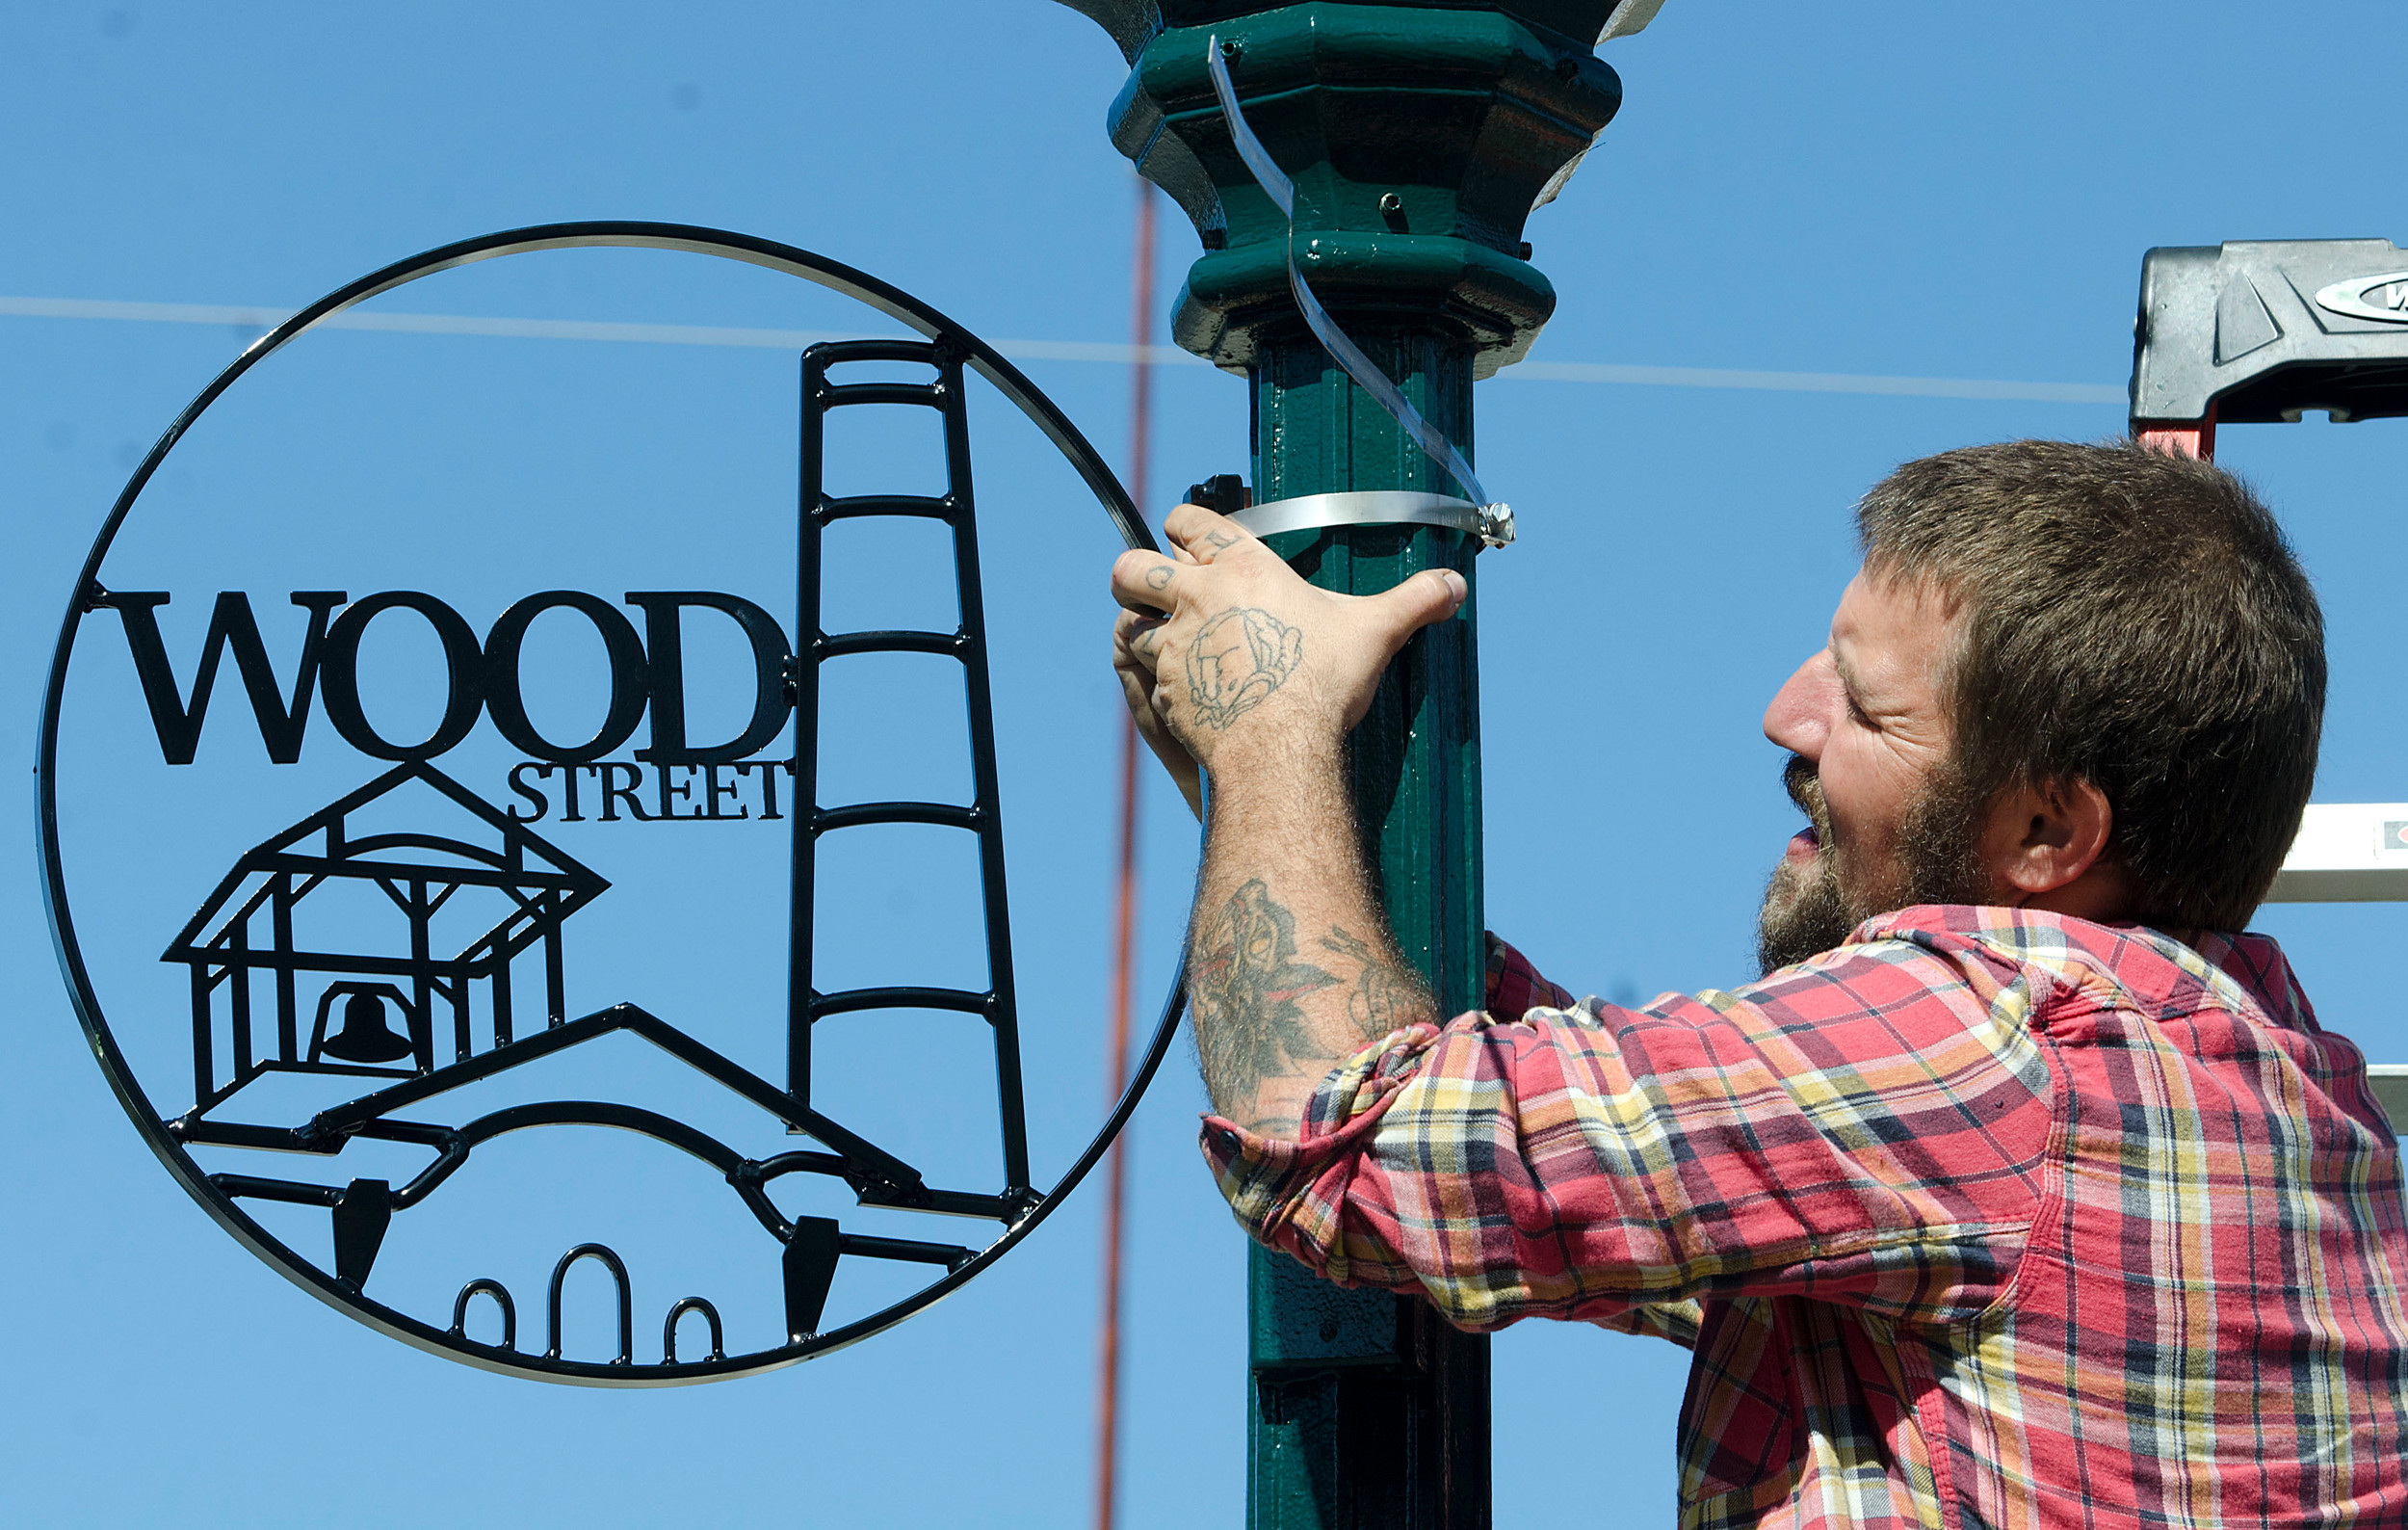 Tim Ferland of the Steel Yard hangs a metal sign that his team designed and made on a Wood Street lamp.